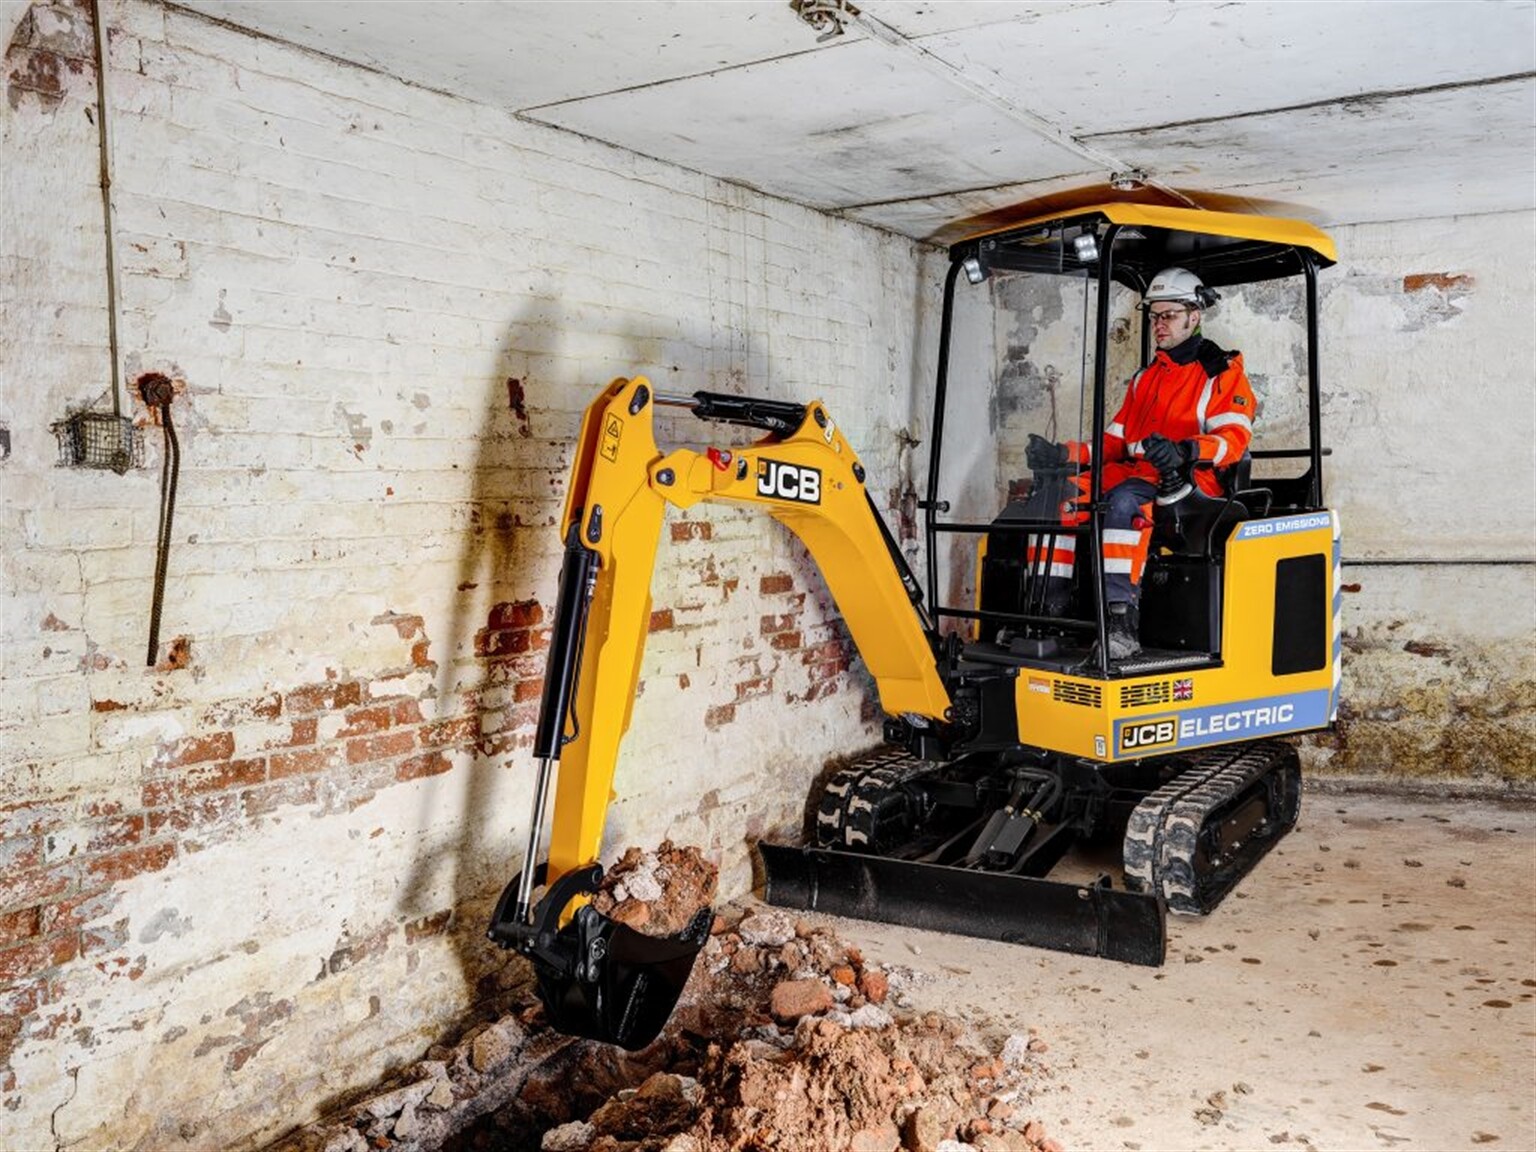 Electric Dreams and more with JCB